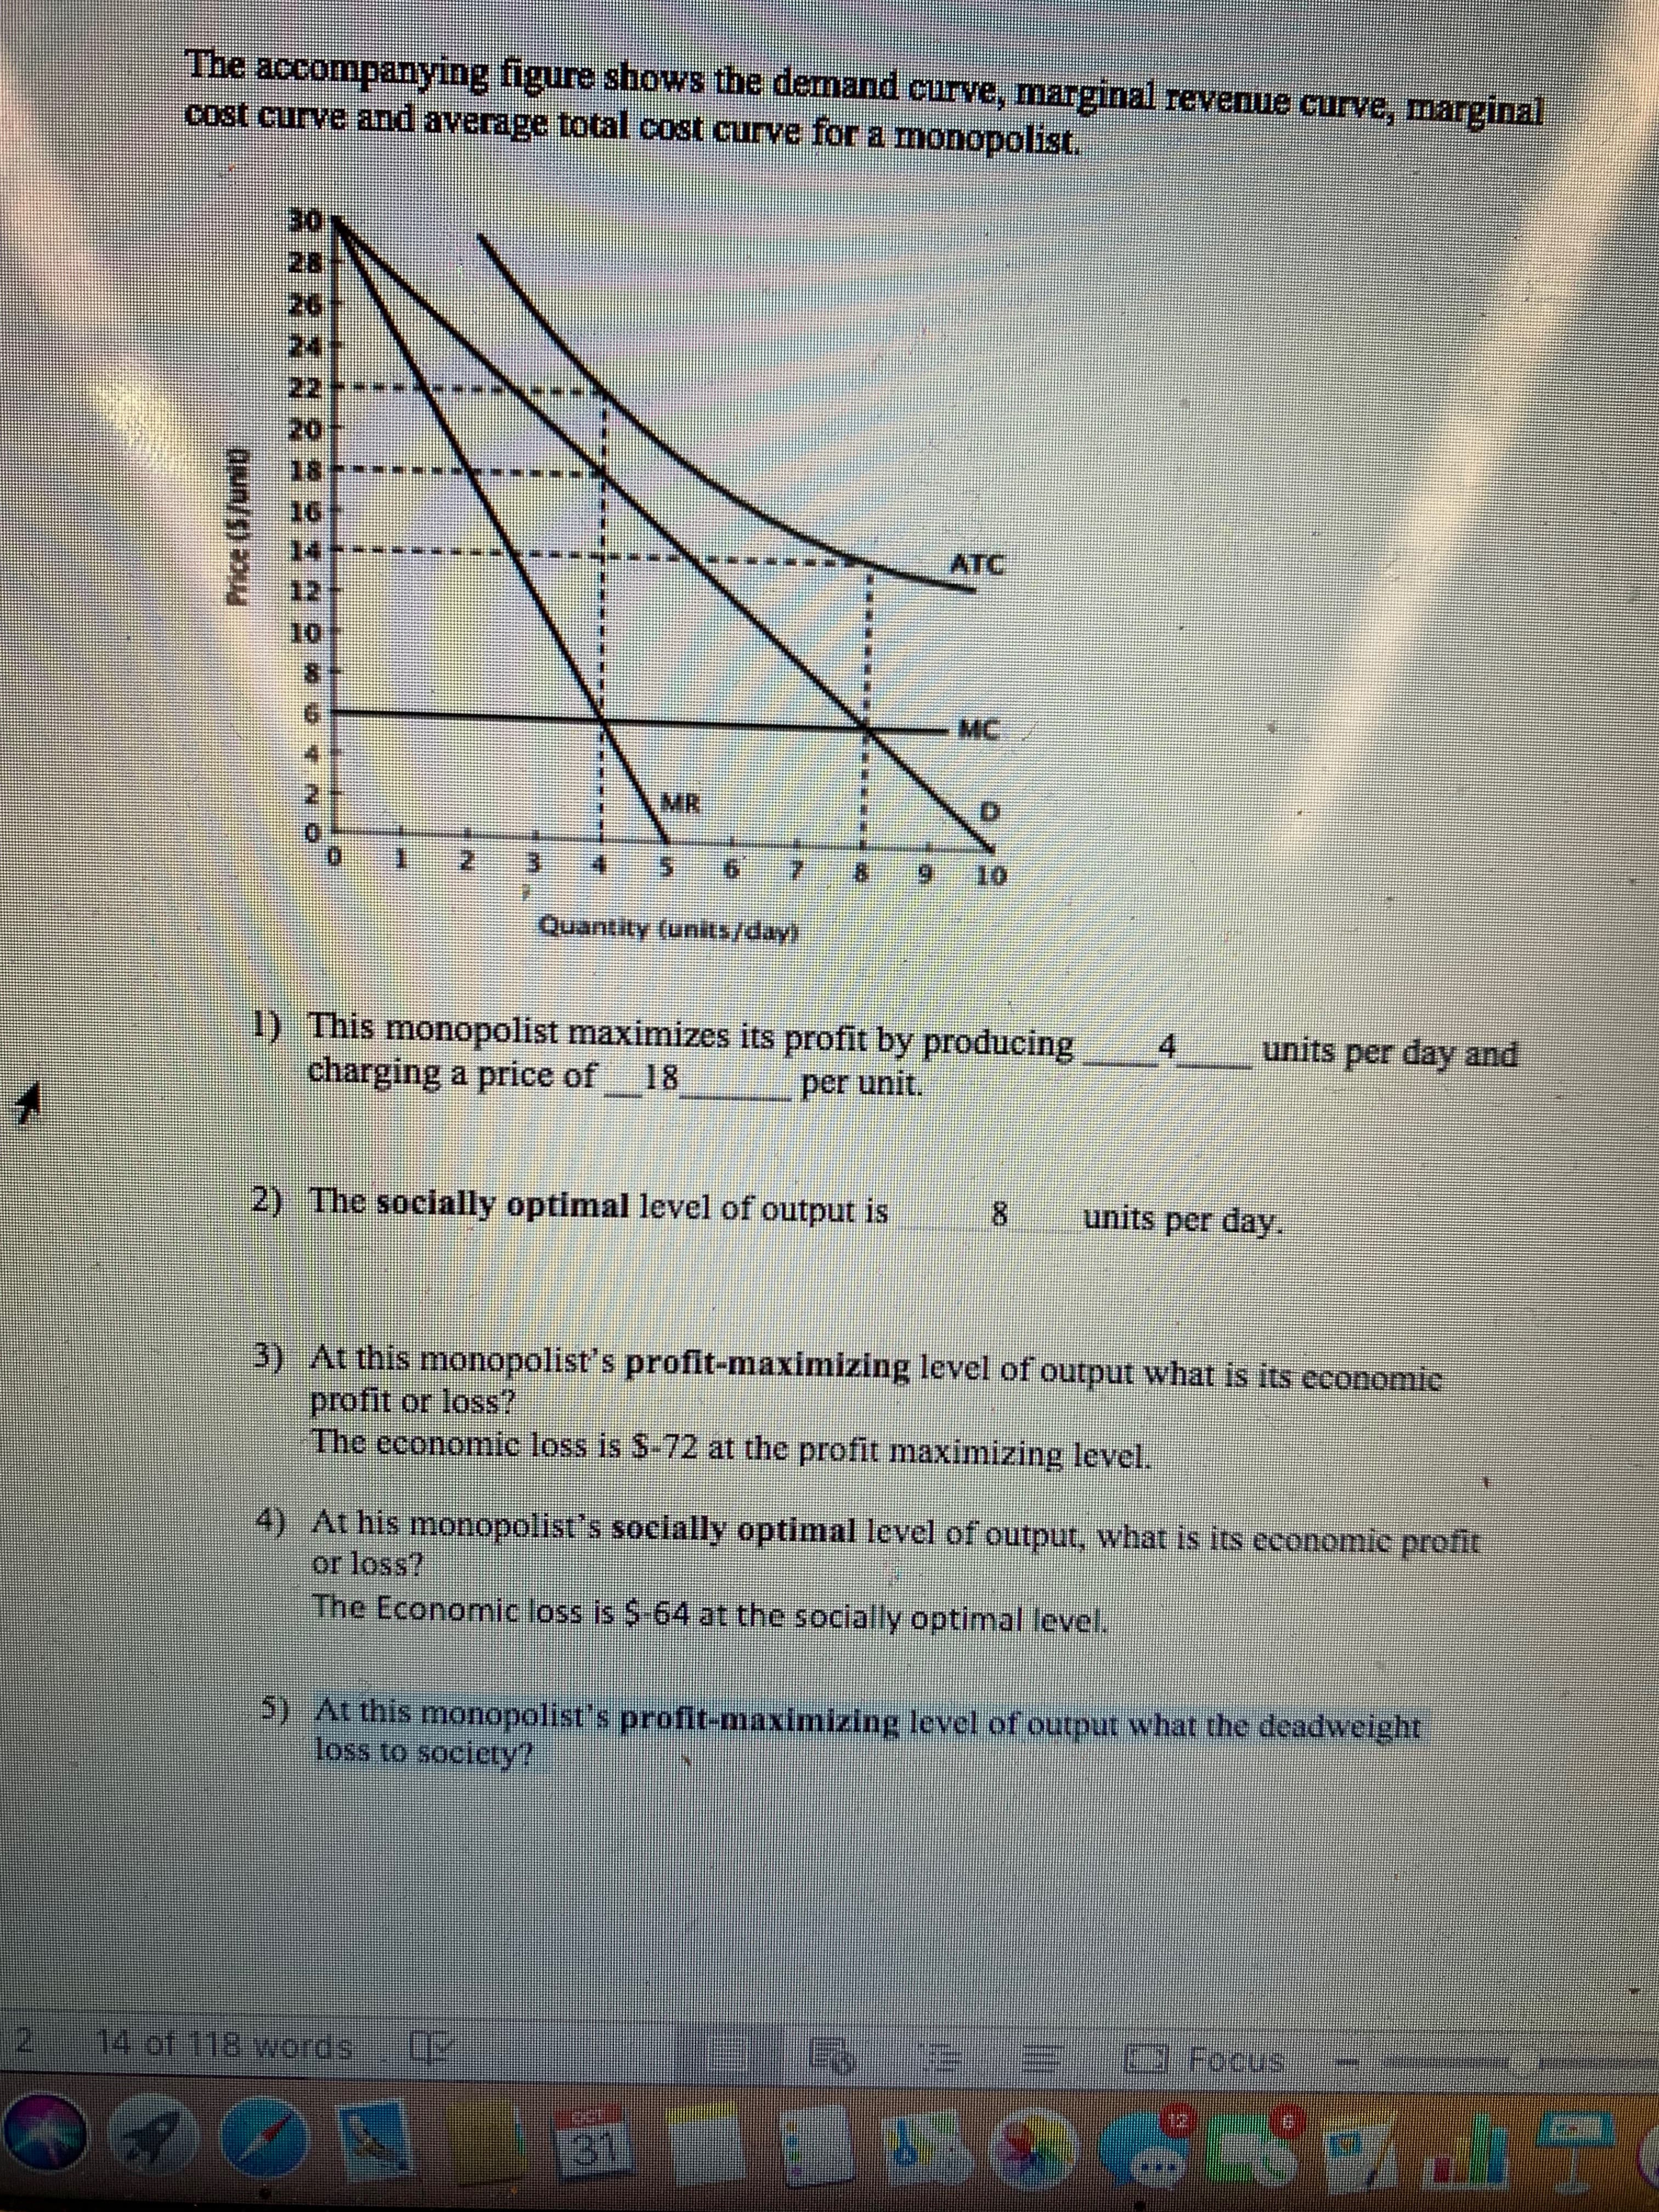 The accompanying figure shows the demand curve, marginal revenue curve, marginal
cost eurve and average total cost curve for a monopolist.
30
28
26
24
22
20
18-
16
ATC
12
10
-MC
4
MR
2
3
6
9
10
Quantity (units/day!
1) This monopolist maximizes its profit by producing
charging a price of
4
units per day and
18
per unit
2) The socially optimal level of output is
8
units per day.
3) At this monopolist s profit-maximizing level of output what is its economic
profit or loss?
The economie loss is $-72 at the profit maximizing level.
4) At his monopolist's socially optimal level of output, what is its economic profit
or loss?
The Economic loss is $-64 at the socially optimal level.
5) At this monopolist's profit-maximizing level of output what the deadweight
loss to society!
14 of 118 words
Focus
31
பொ/து *uu
